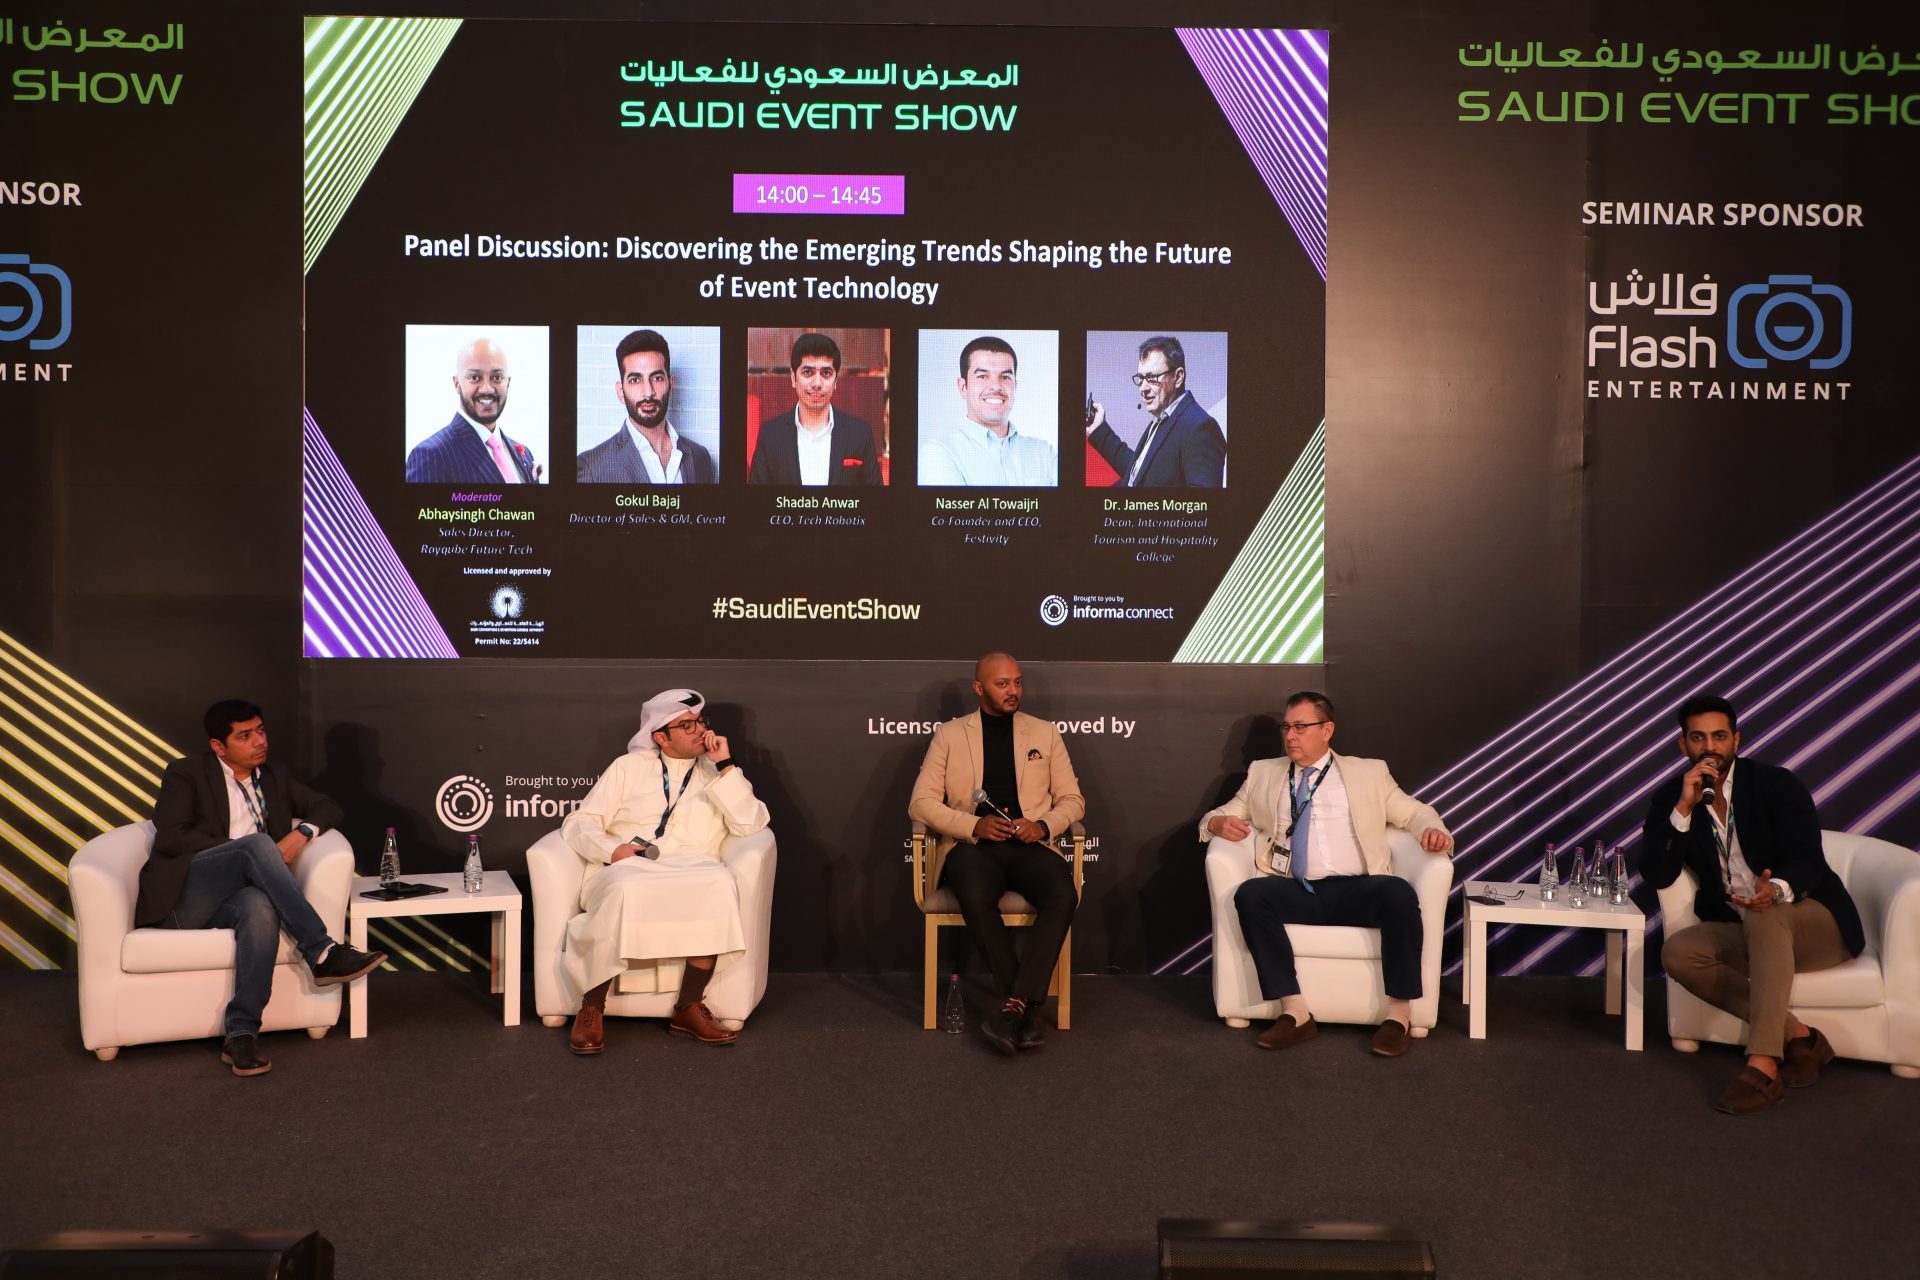 Saudi Event Show looks towards the future of the events and